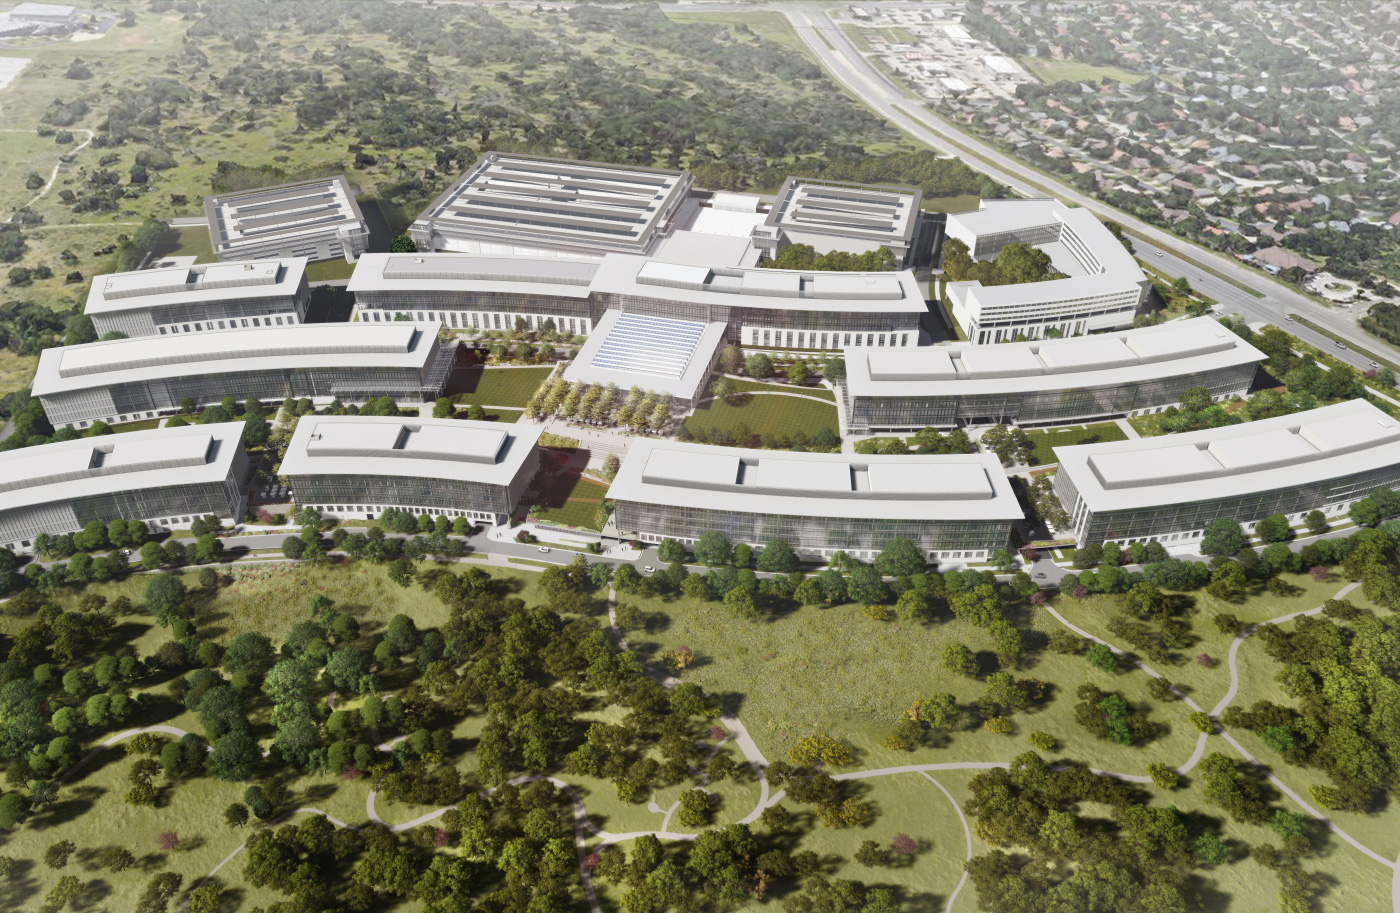 Aerial rendering of the new Texas Apple campus depicting 10 sinuous white office blocks